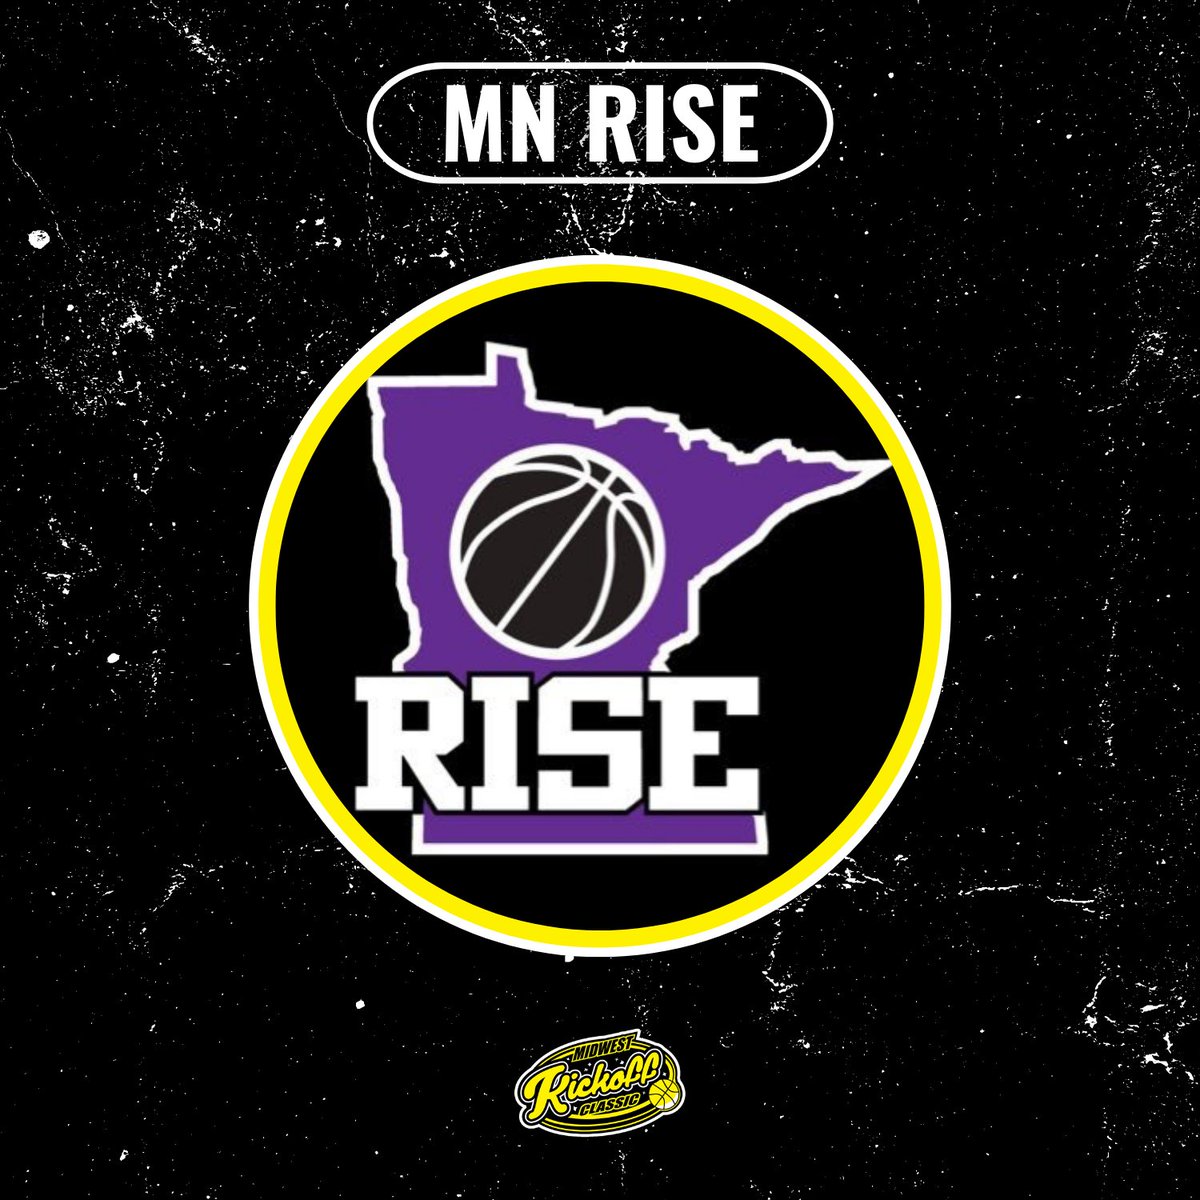 .@MNRiseGirls will be kicking off their season at the 𝗠𝗜𝗗𝗪𝗘𝗦𝗧 𝗞𝗜𝗖𝗞-𝗢𝗙𝗙 𝗖𝗟𝗔𝗦𝗦𝗜𝗖‼️ Register your teams now! ⤵️ aauevents.com/midwest-kick-o…